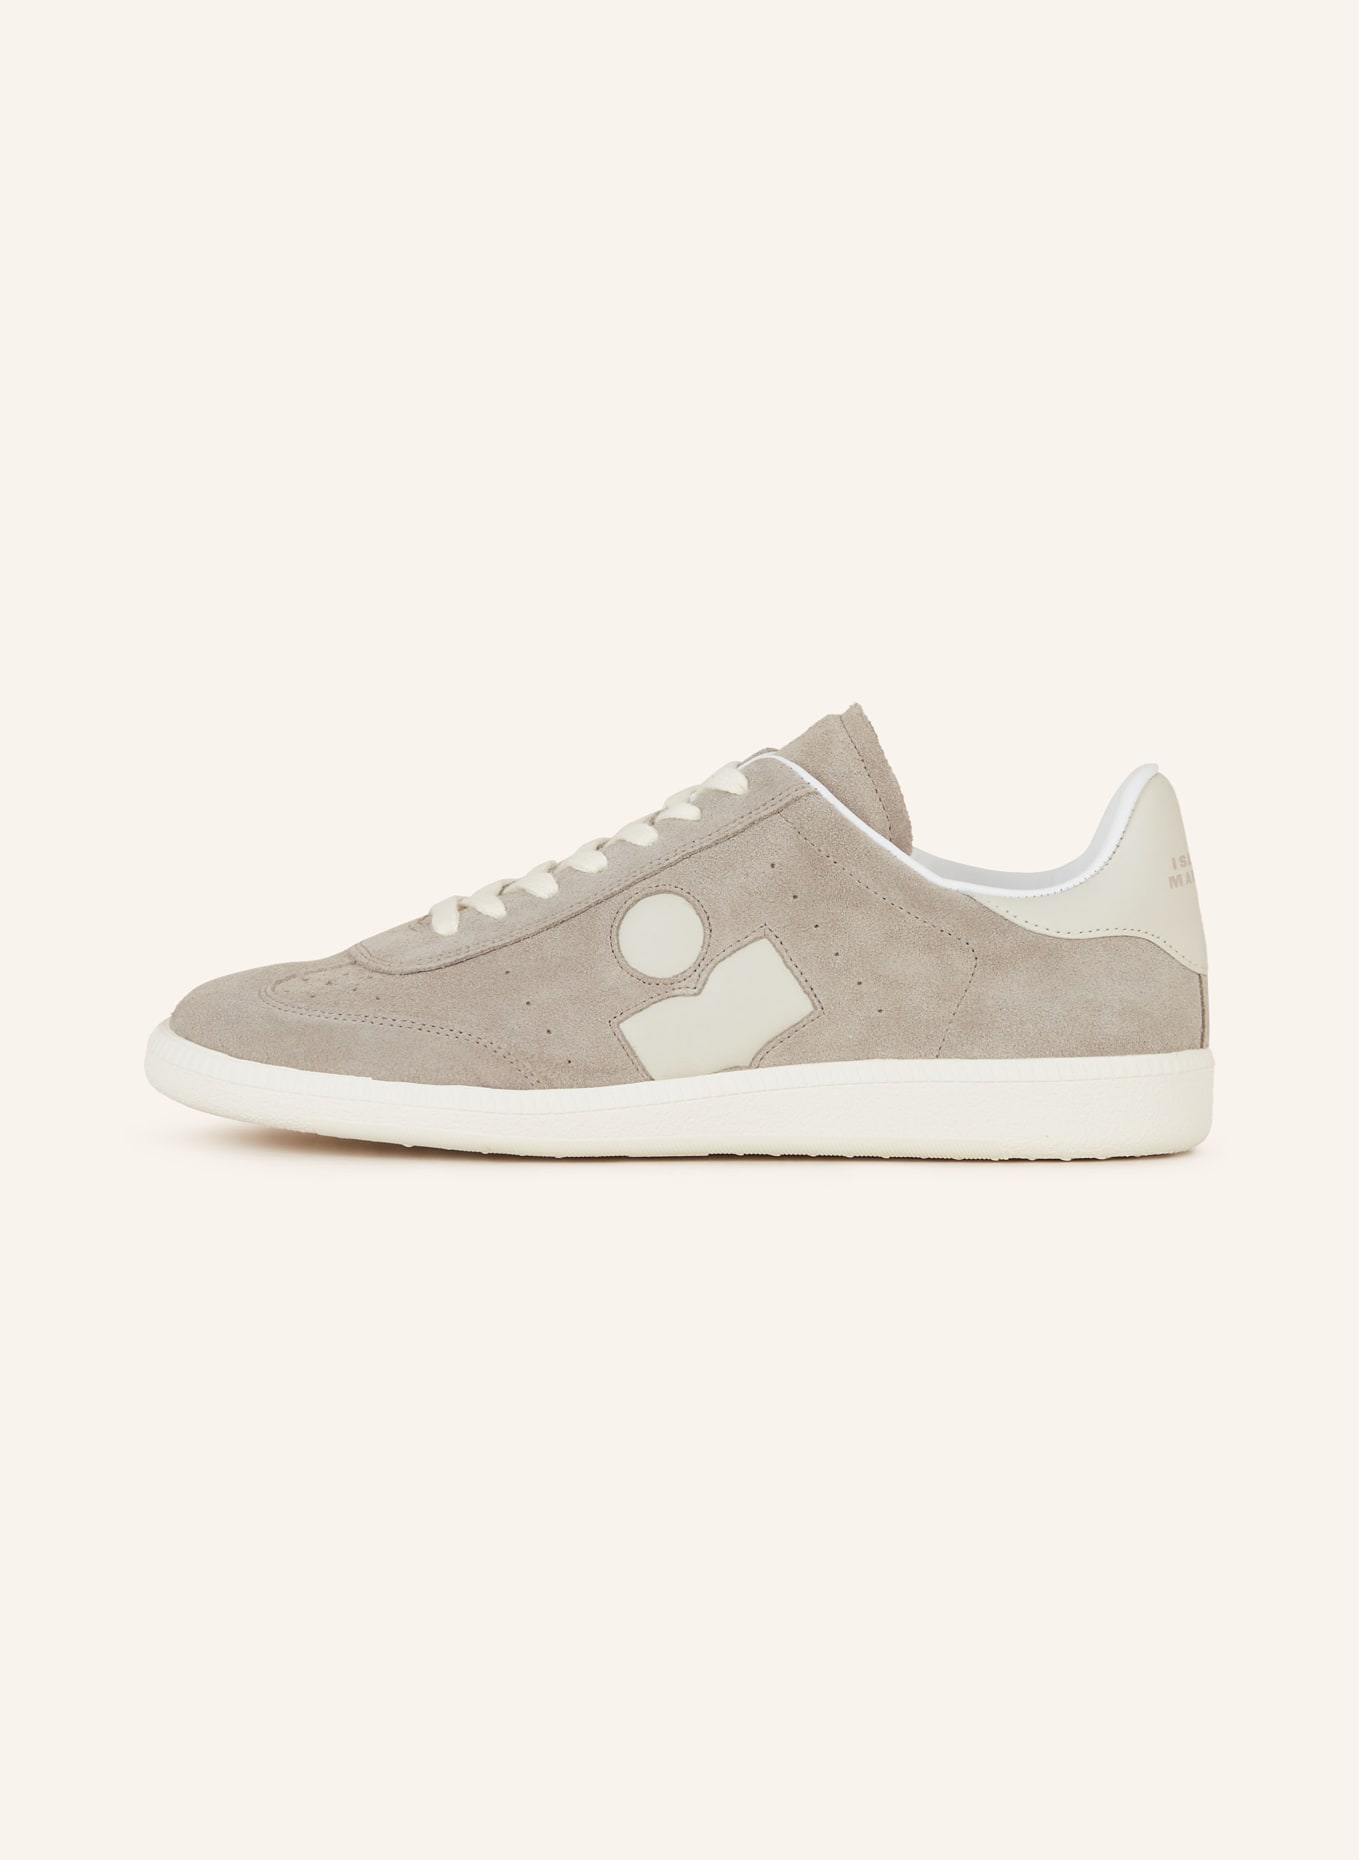 ISABEL MARANT Sneaker BRYCE, Farbe: TAUPE (Bild 4)